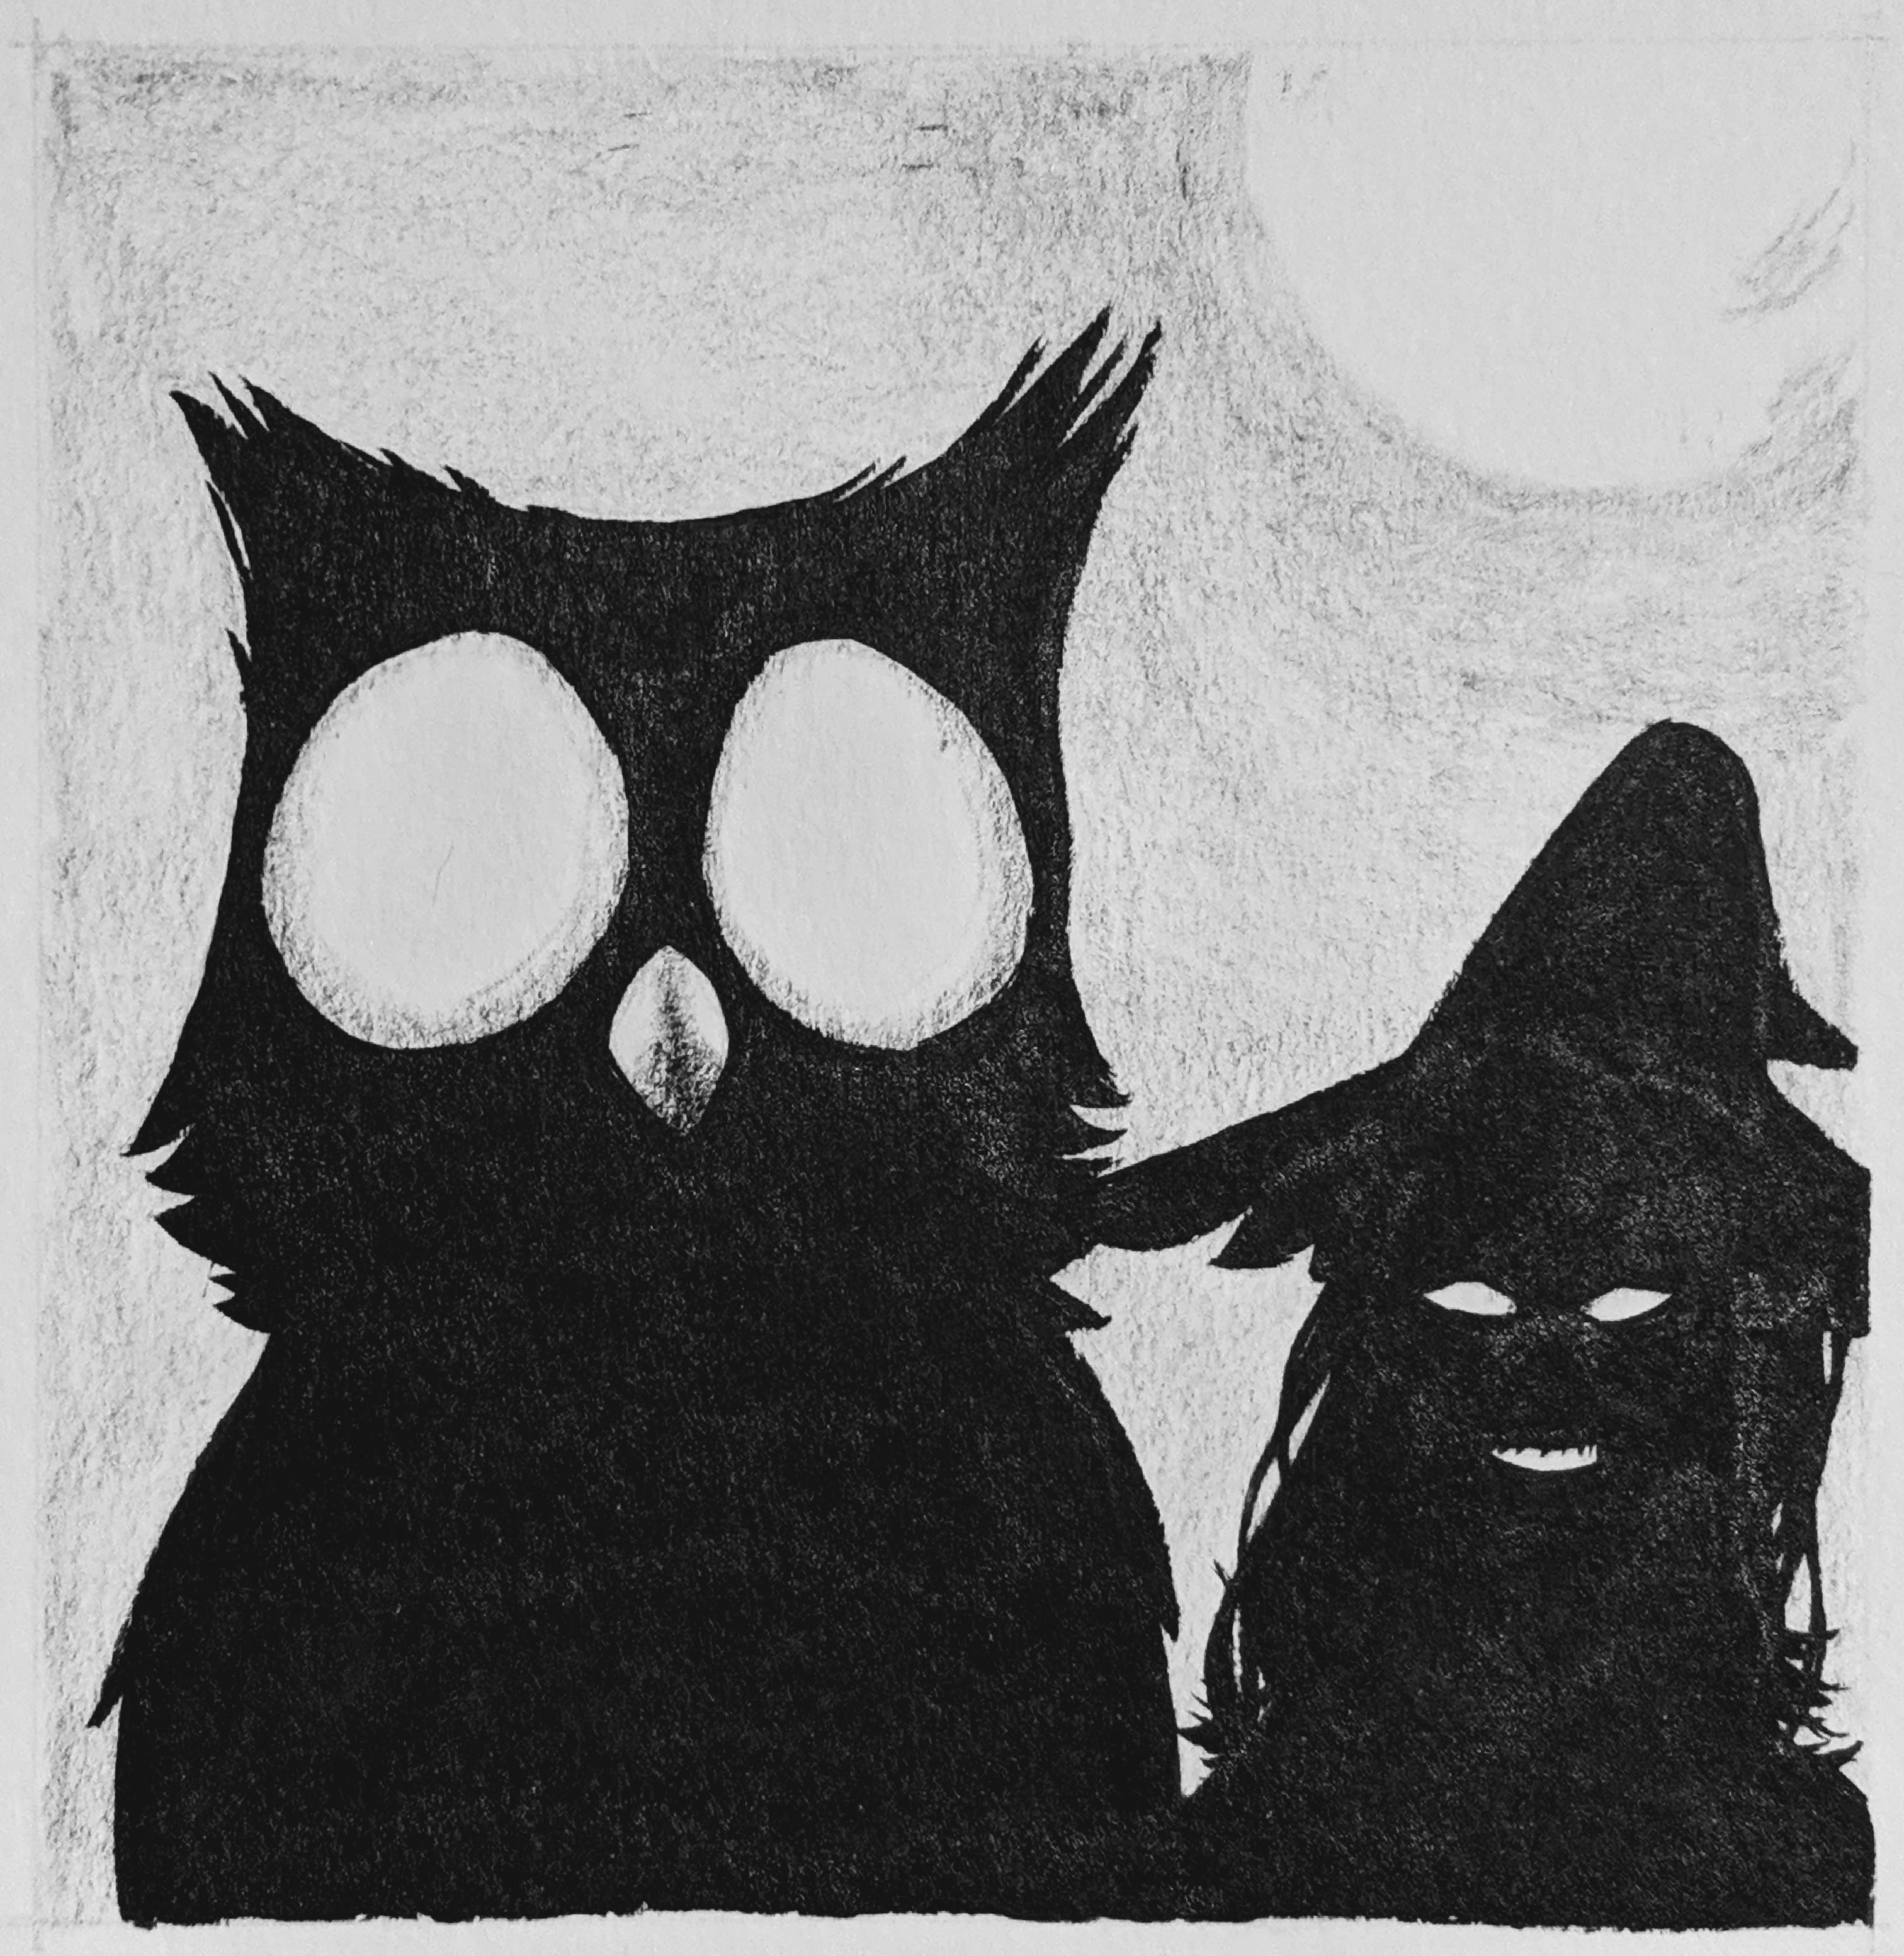 An owl in silhouette with glowing eyes and beak in front of a witch, also in silhouette with glowing eyes and teeth